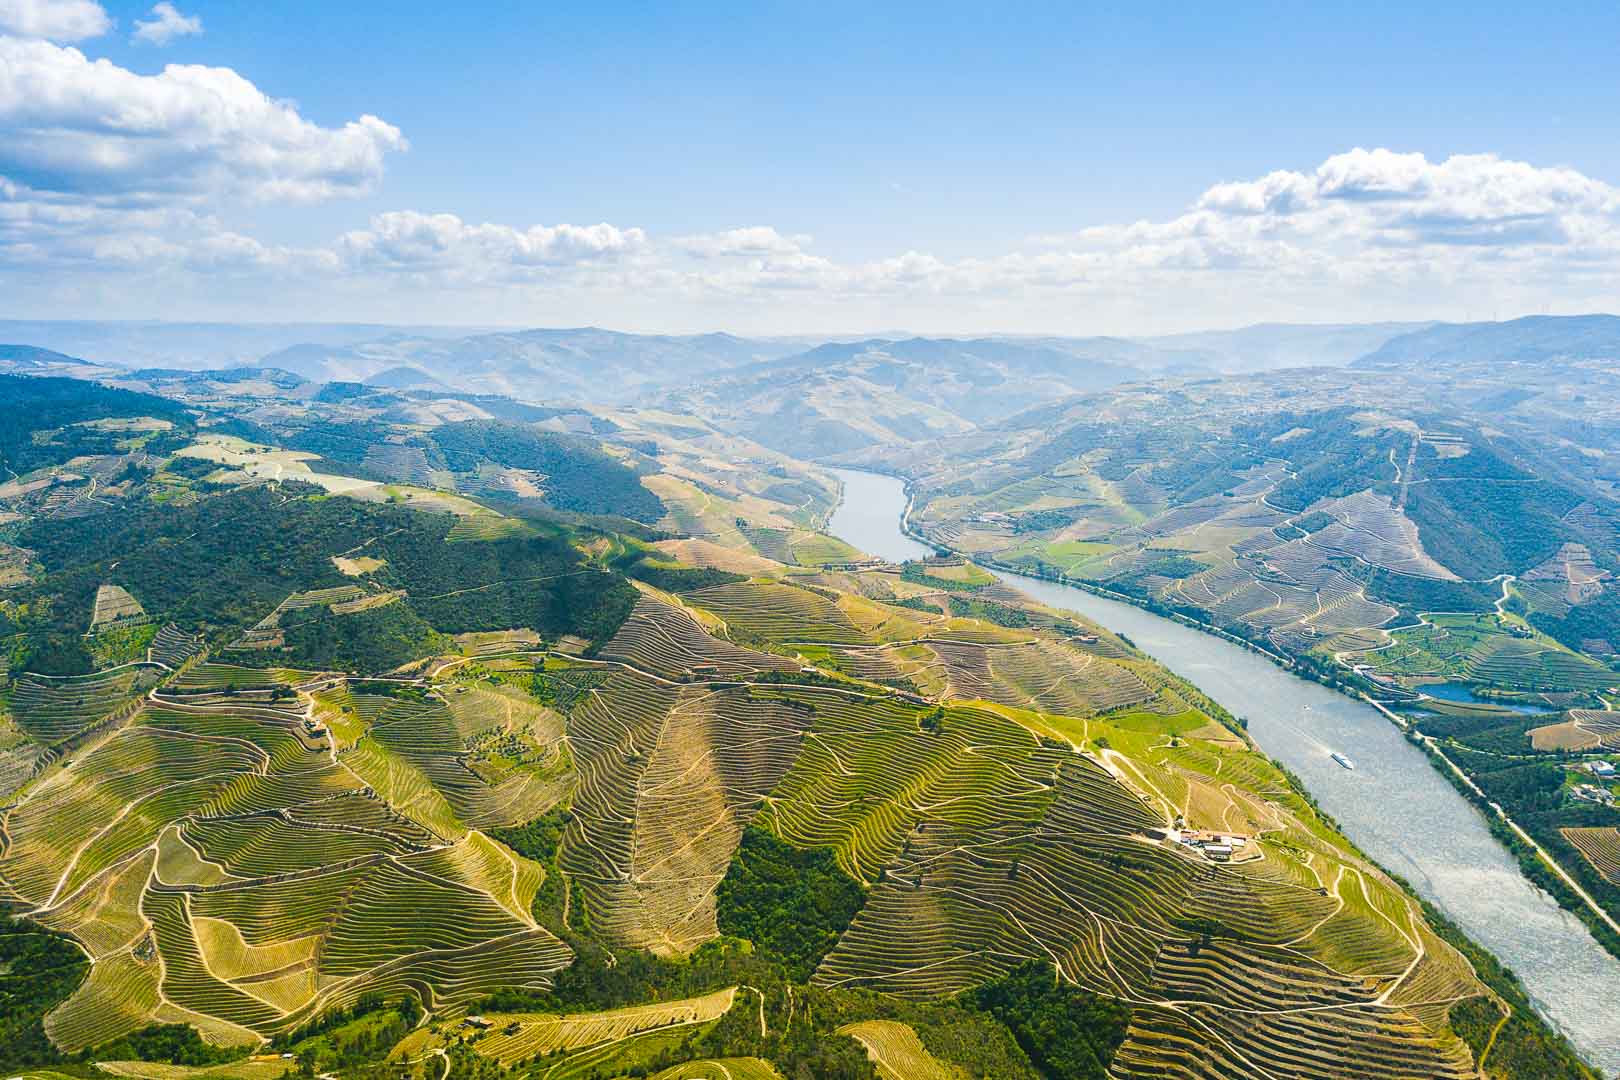 douro valley is in the major landmarks in portugal